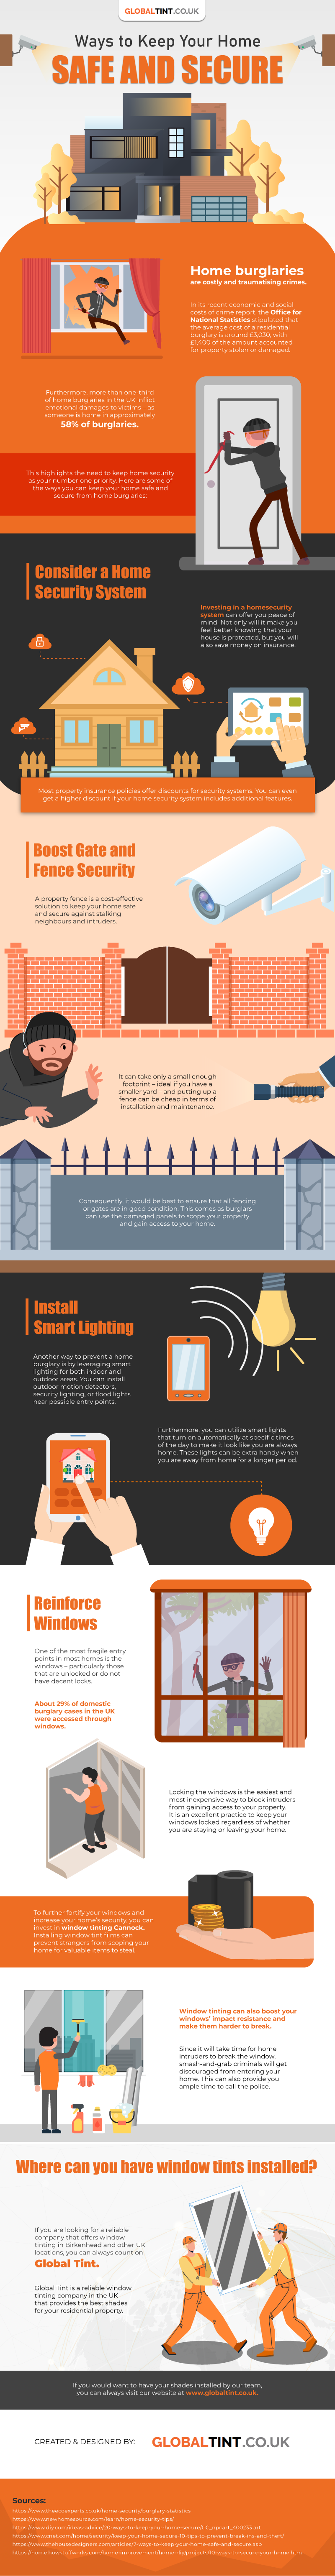 WAYS TO KEEP YOUR HOME SAFE AND SECURE [INFOGRAPHIC]